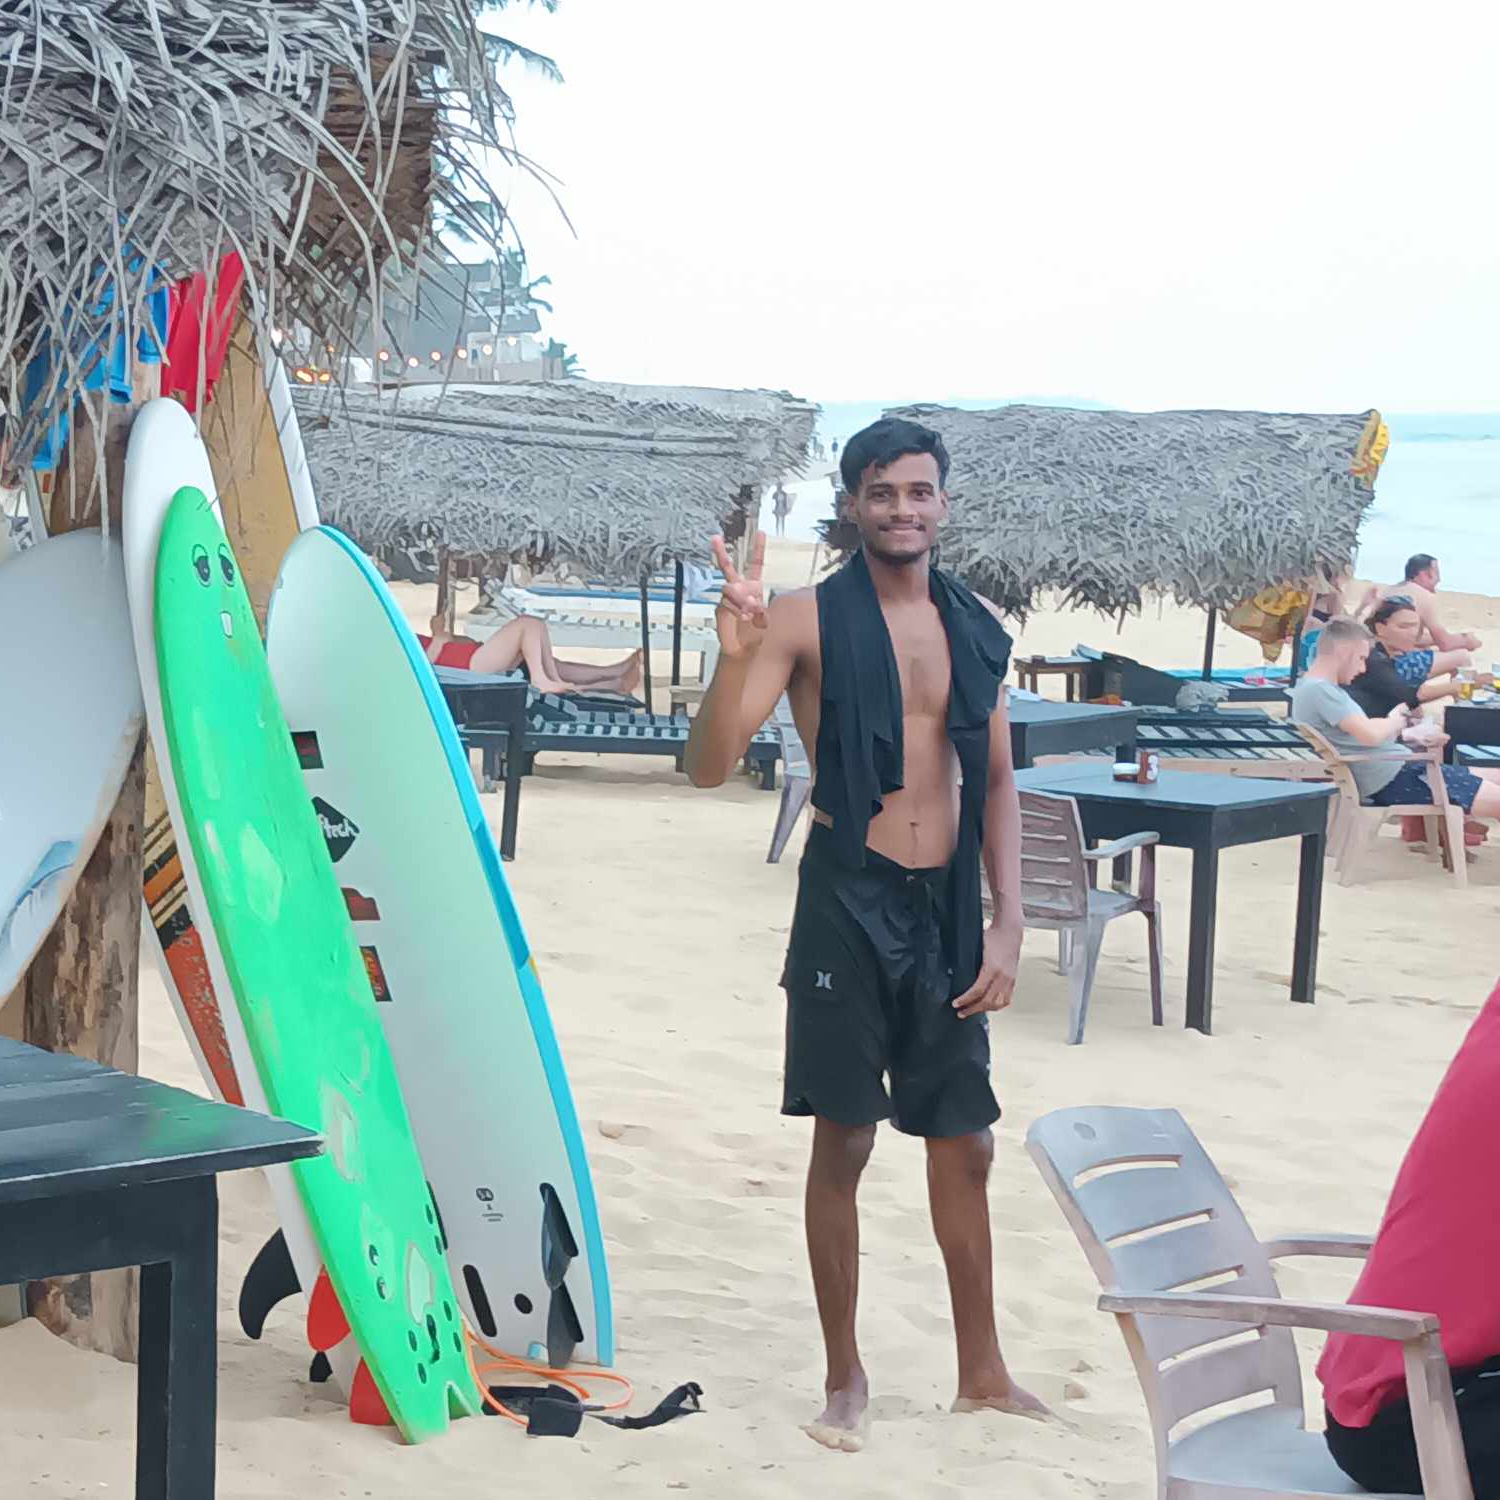 A picture of surfboards lined up on the beach and a young man in swimming trunks.